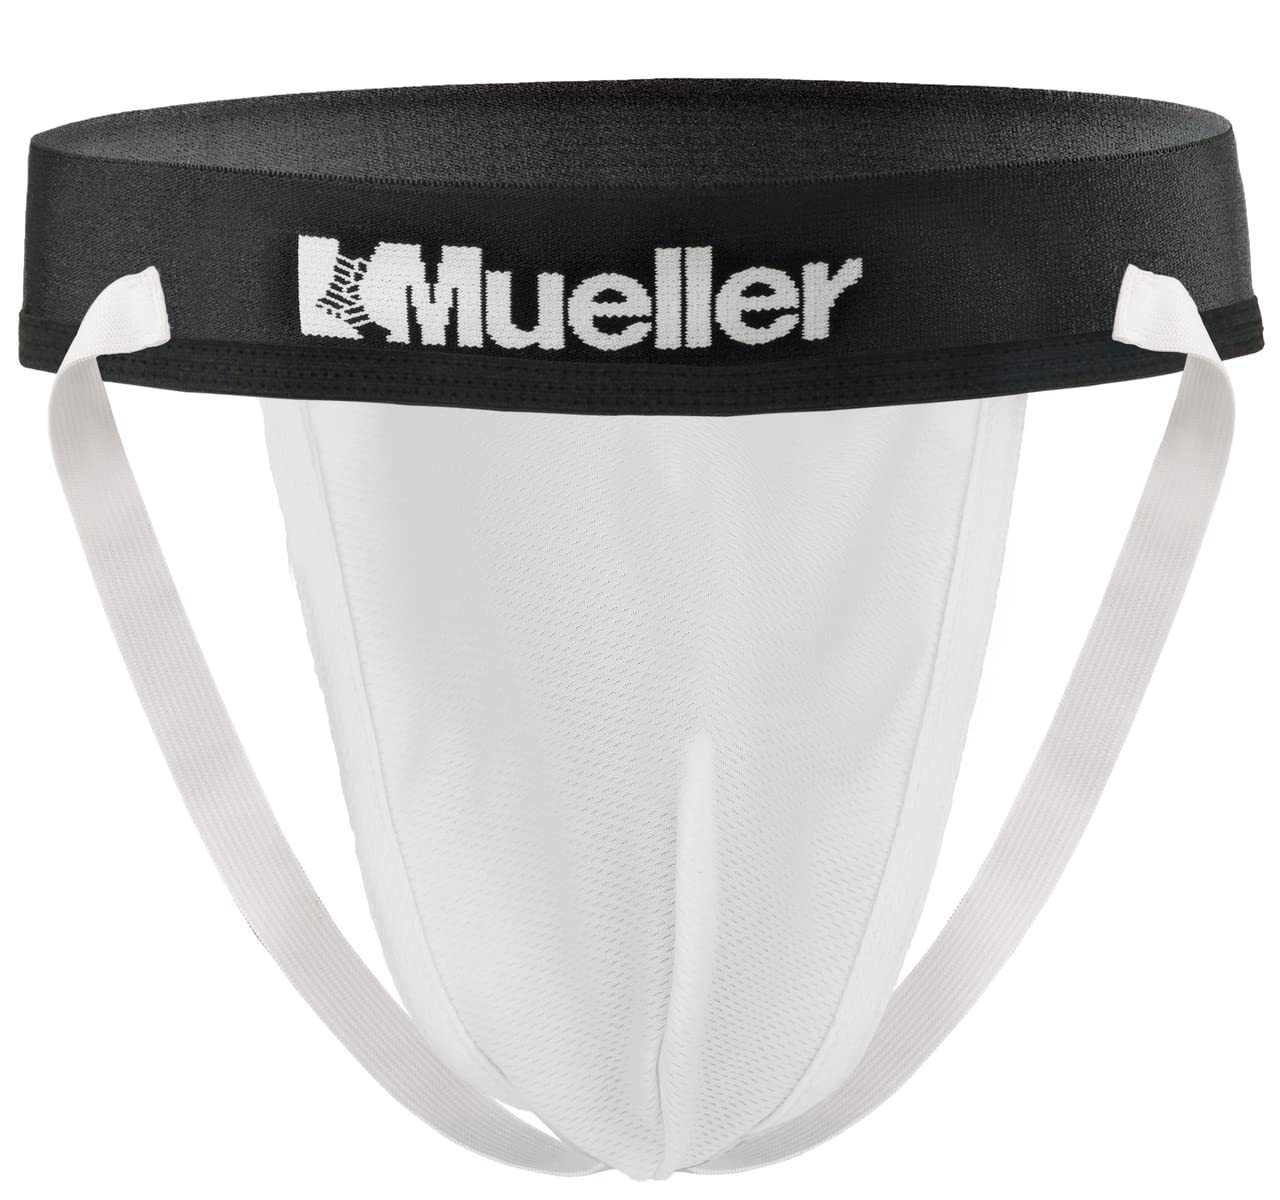 Mueller Sports Medicine Mueller Adult Athletic Supporter with Flex Shield Cup, Medium, White/Gray, 1 Count